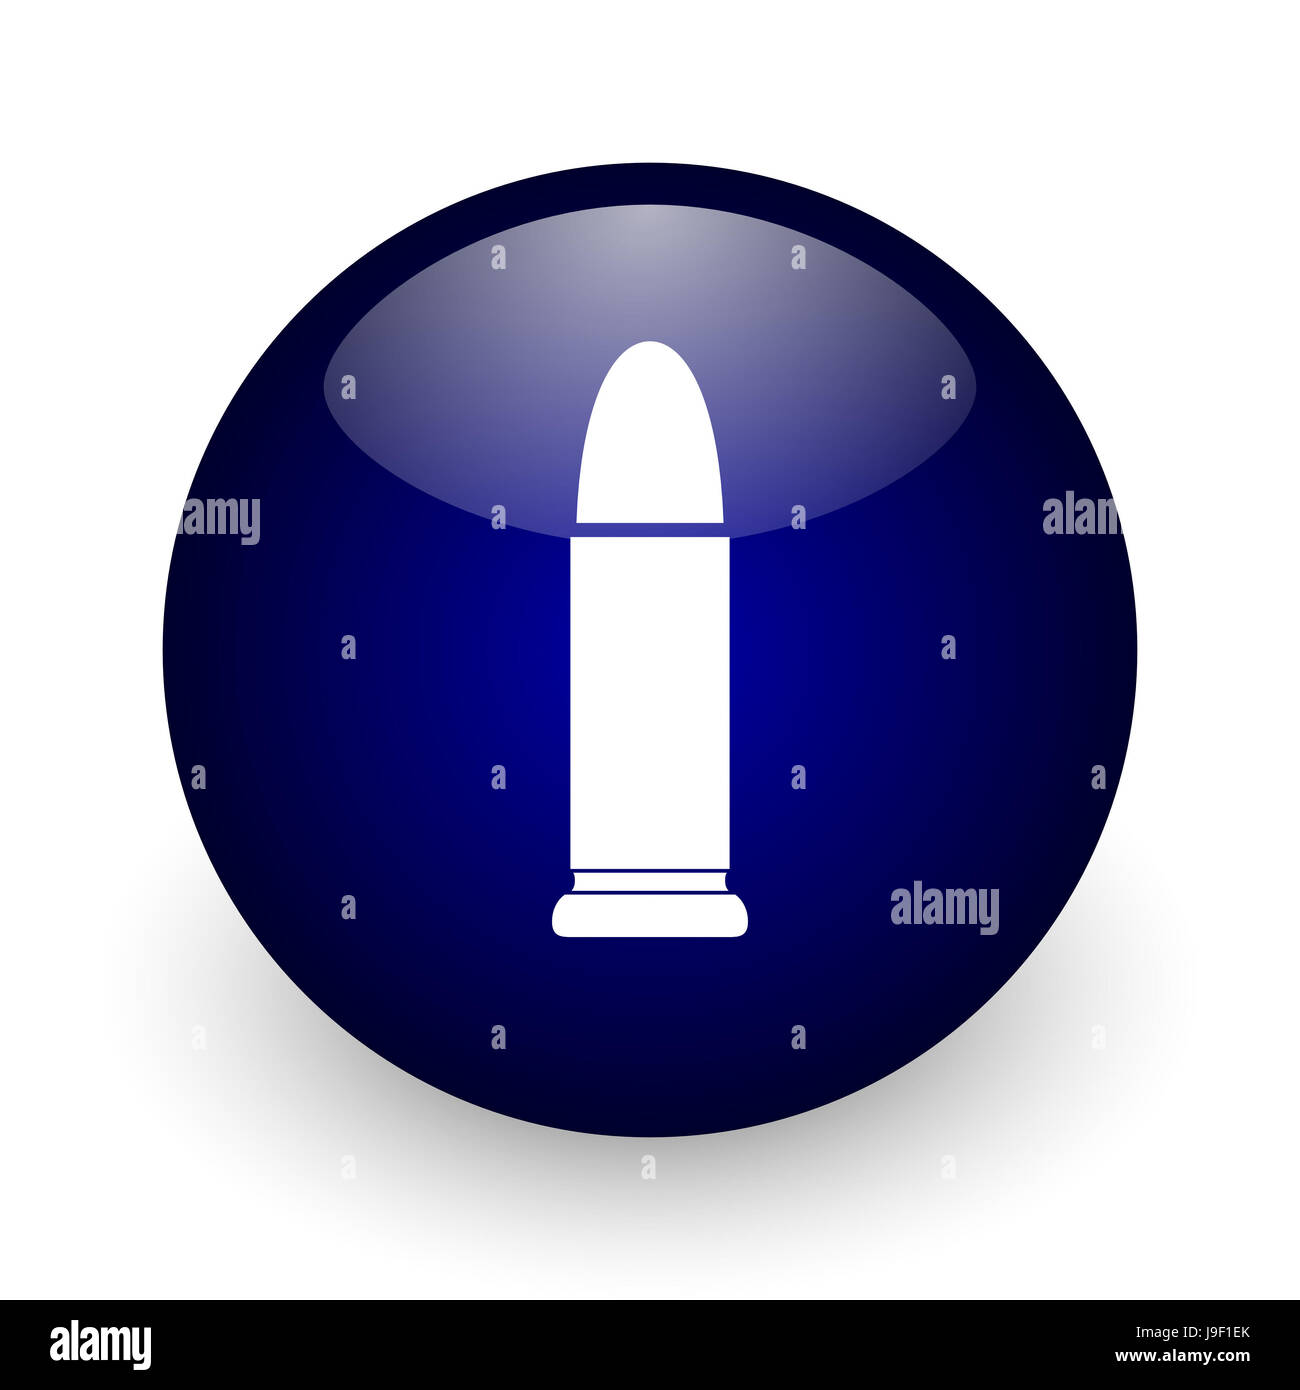 Ammunition blue glossy ball web icon on white background. Round 3d render button. Stock Photo